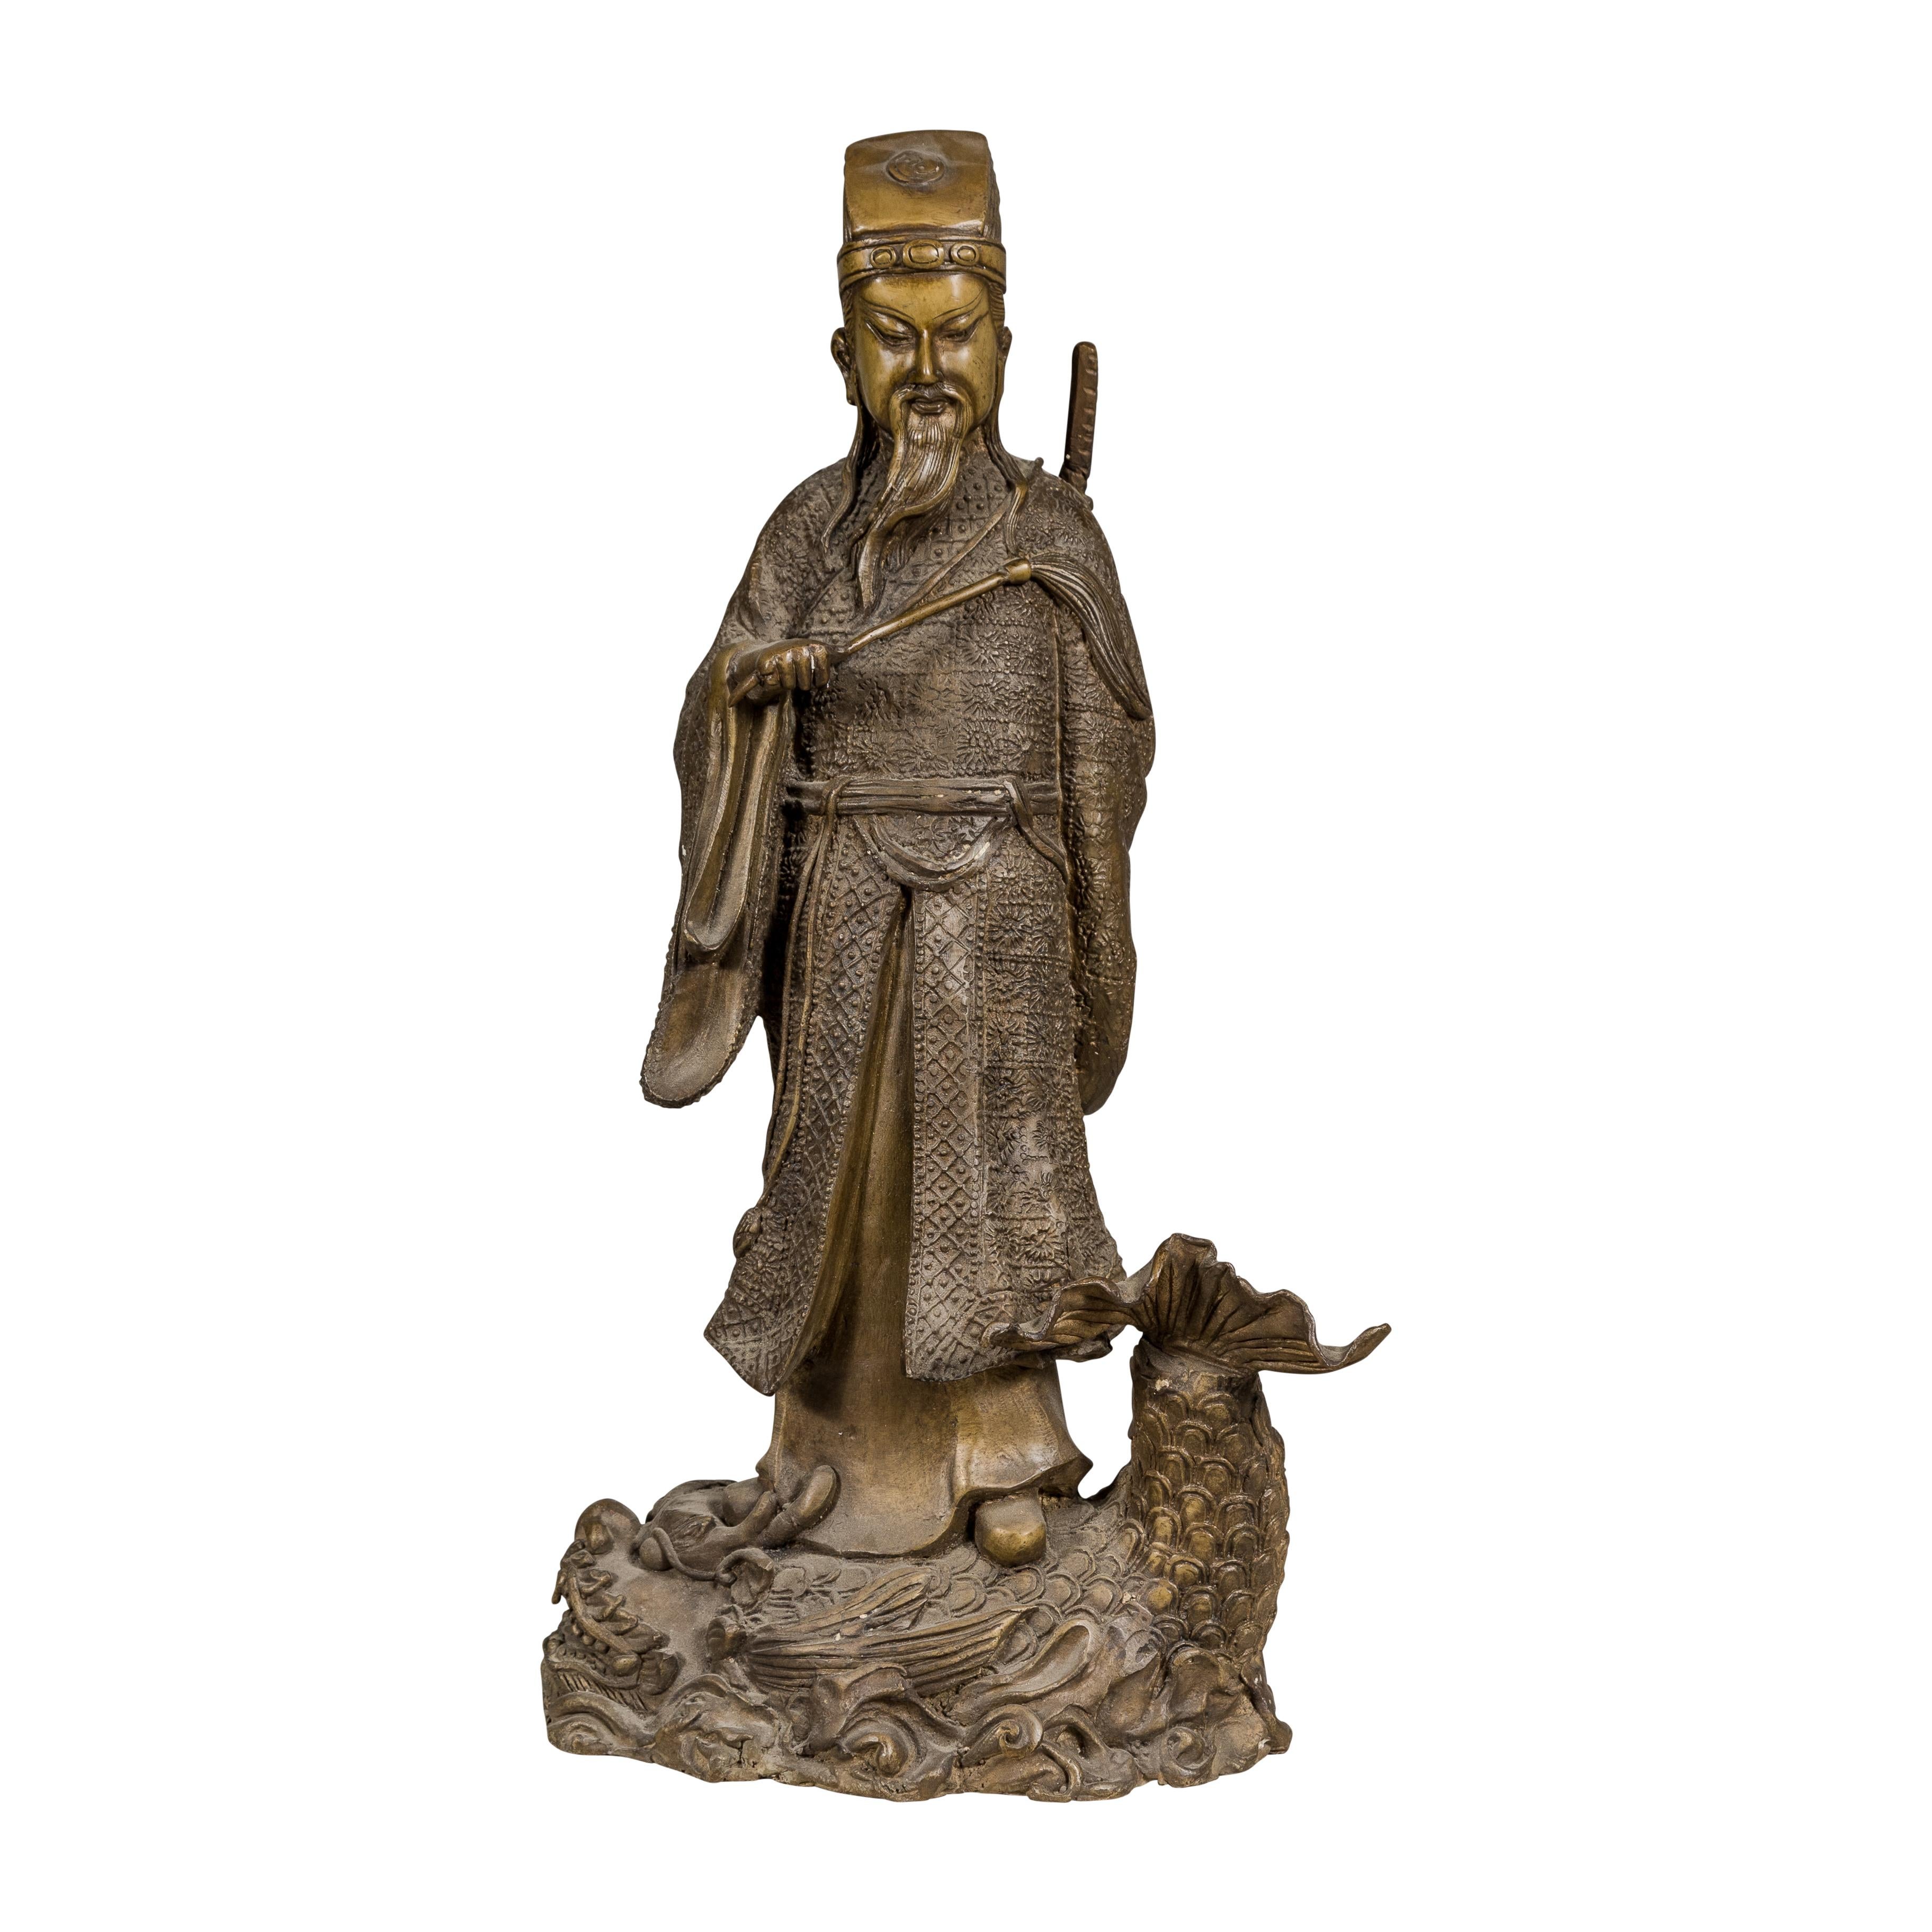 A bronze vintage statuette depicting a Chinese ancestral figure standing on a giant fish. Discover a magnificent fusion of artistry and heritage with this vintage bronze statuette, intricately depicting a revered Chinese ancestral figure, poised